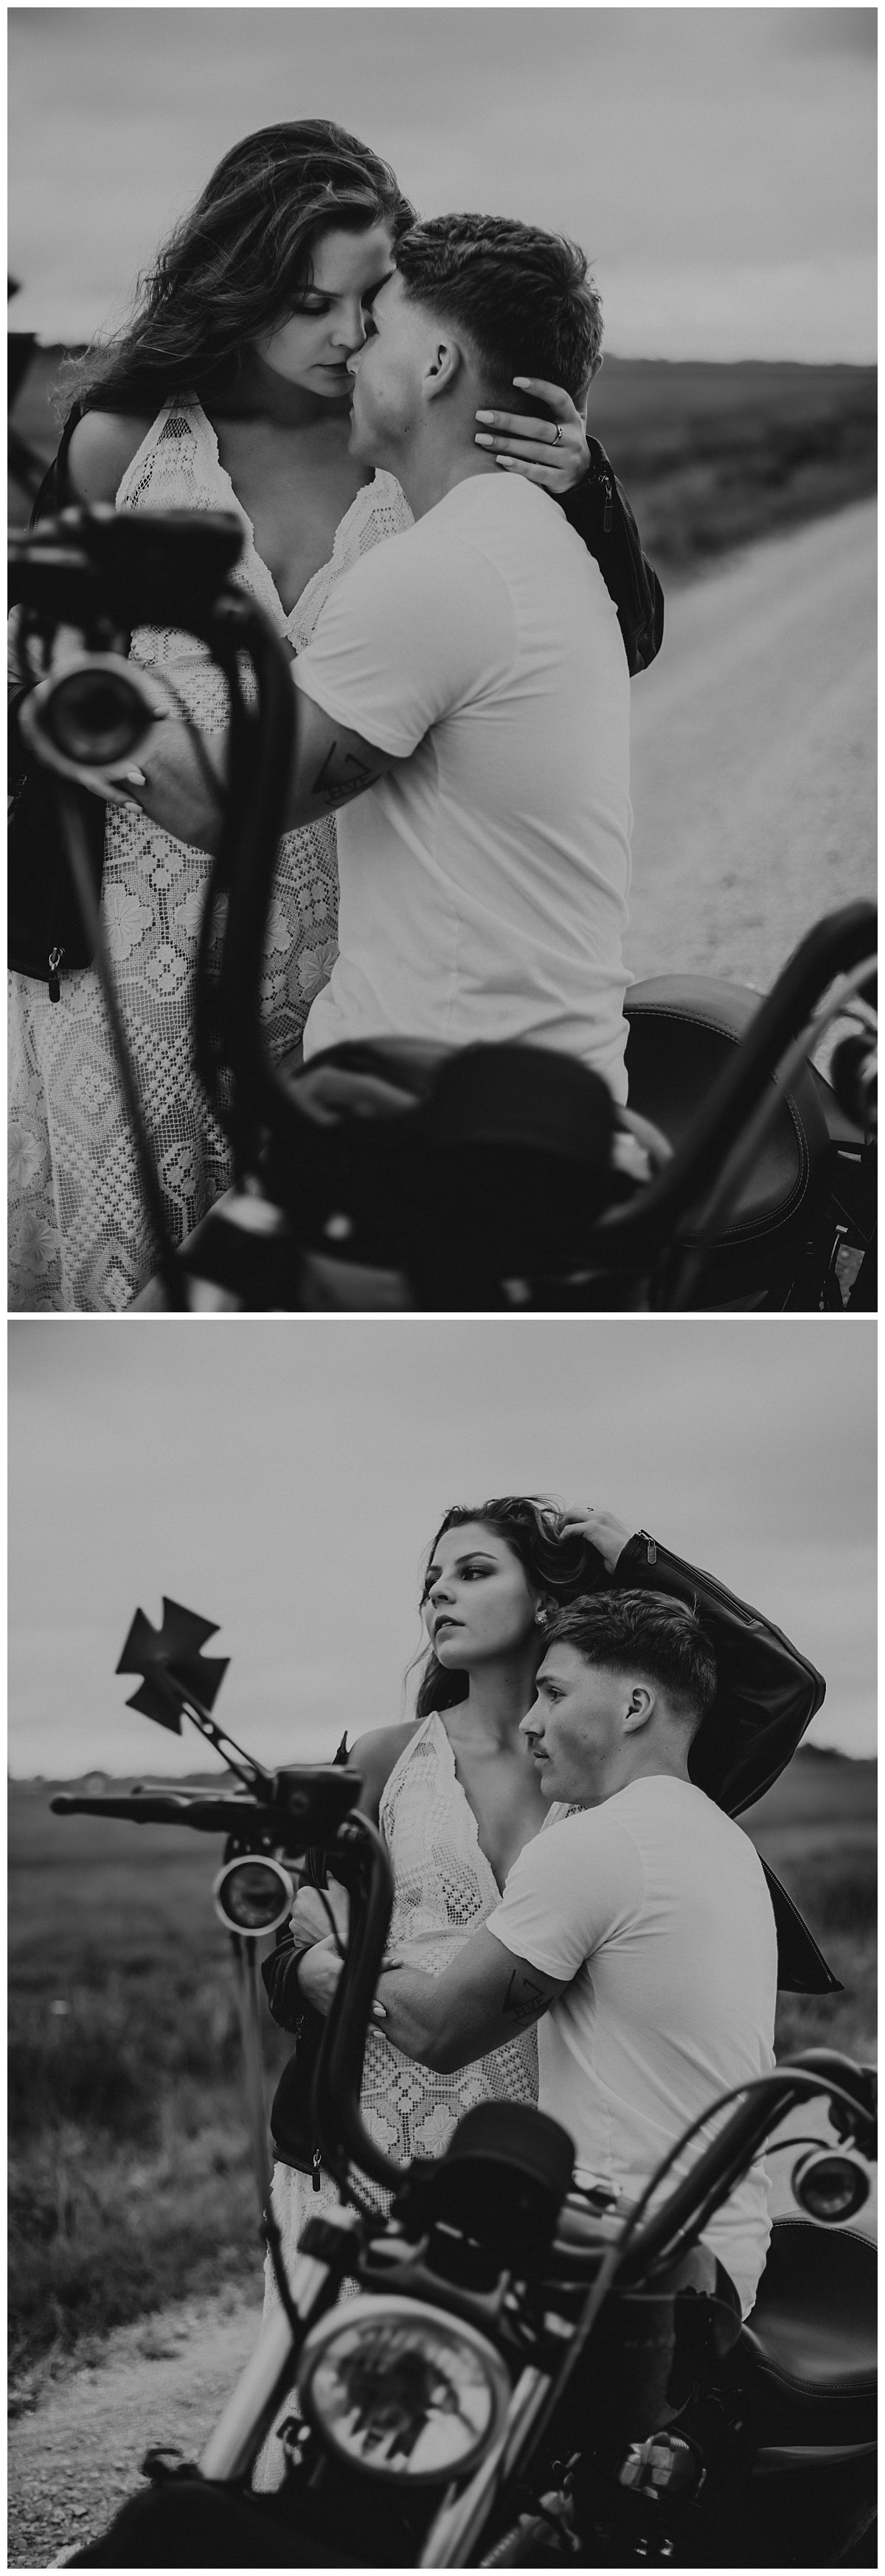 motorcycle+session+_+adventure+session+_+engagement+session+_+motorcycle+photos+_+lana+del+rey+_+ride+or+die+_+adventurous+couple+_+kansas+city+photographer+_+kansas+city+photography (13).jpeg